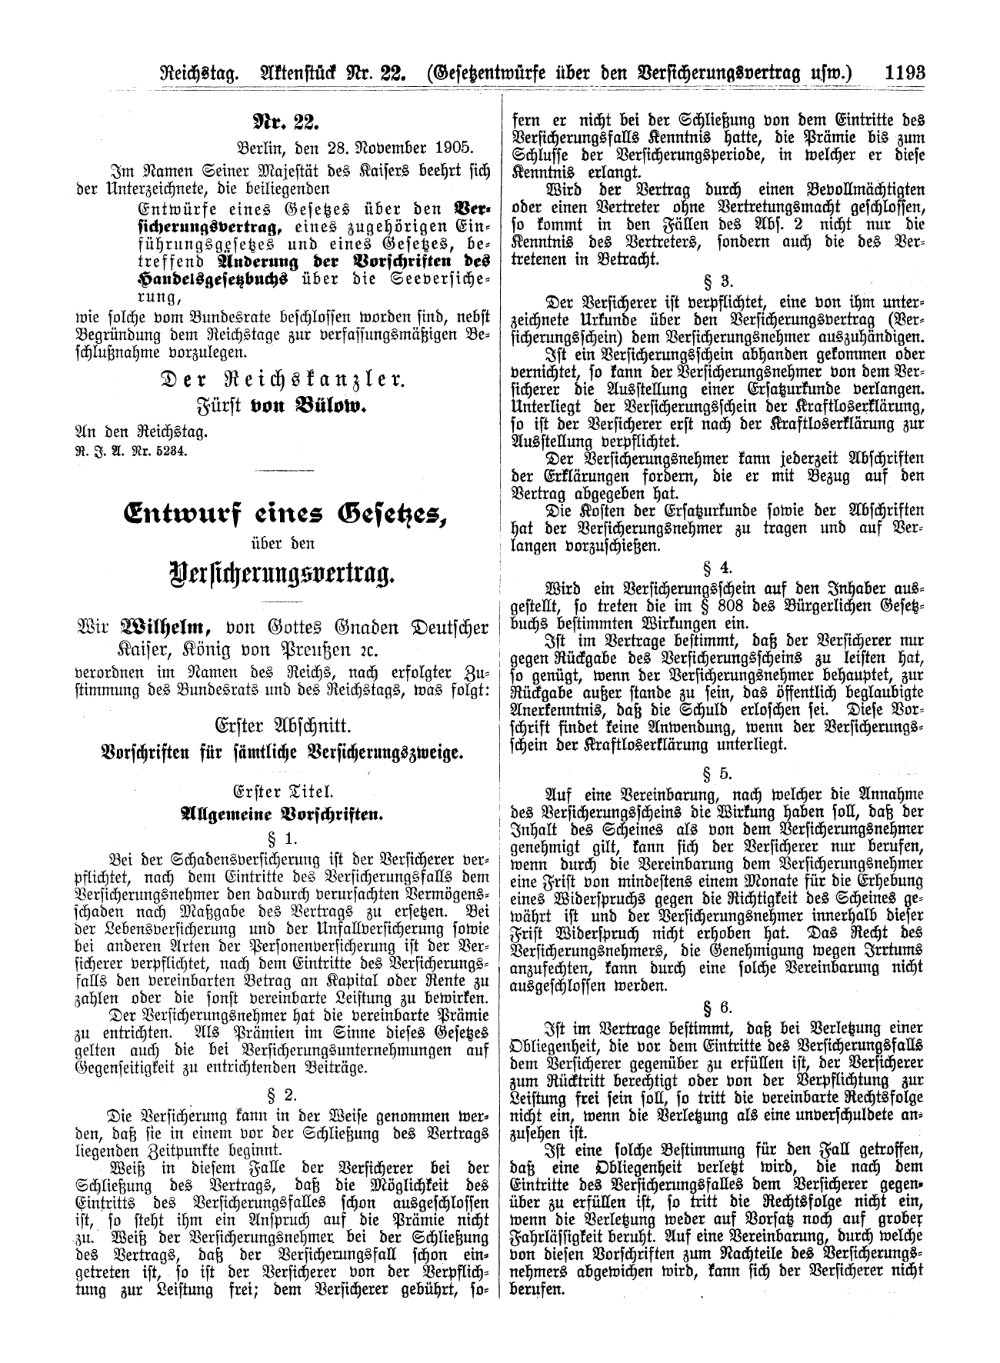 Scan of page 1193